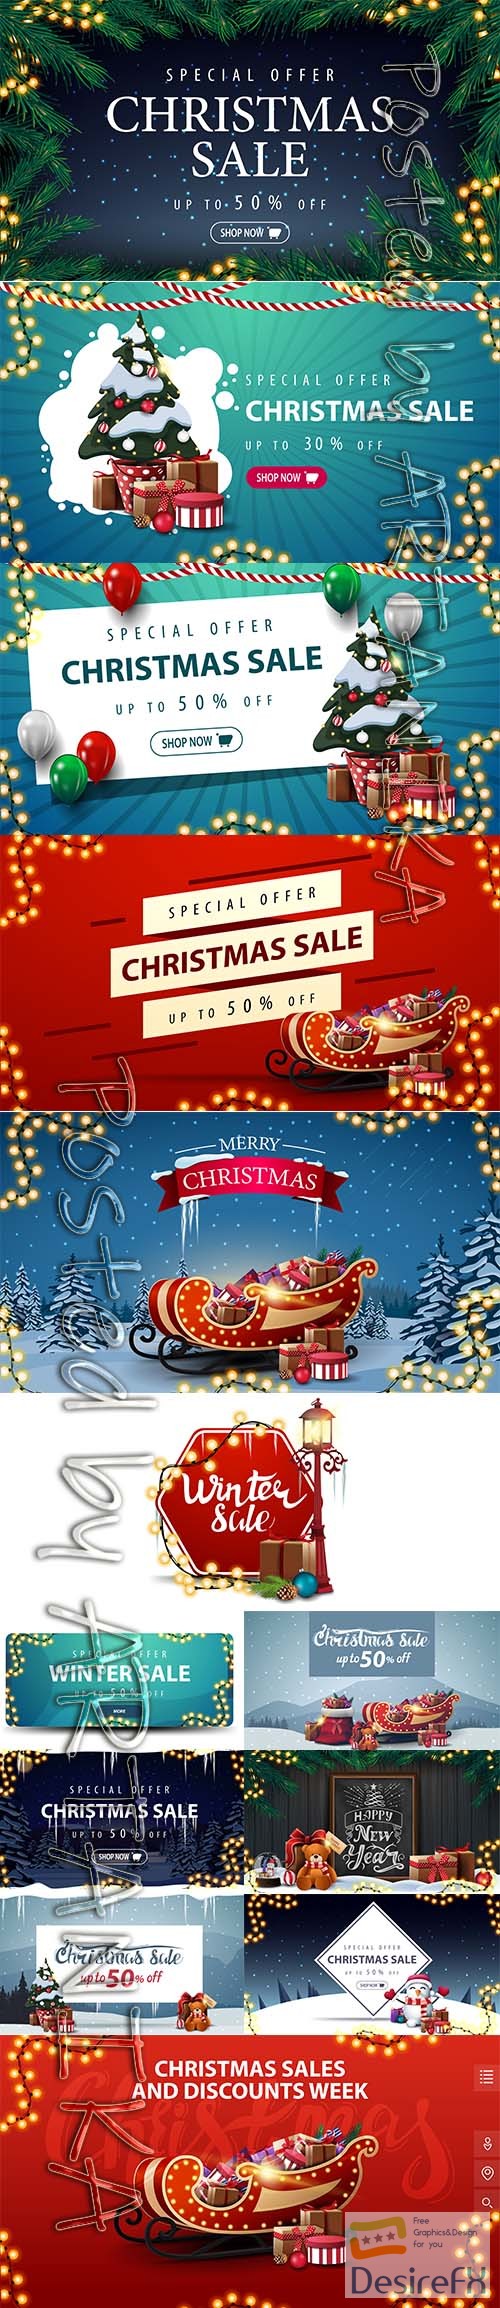 Christmas Sale Discount Banner and Illustrations Set Vol 3